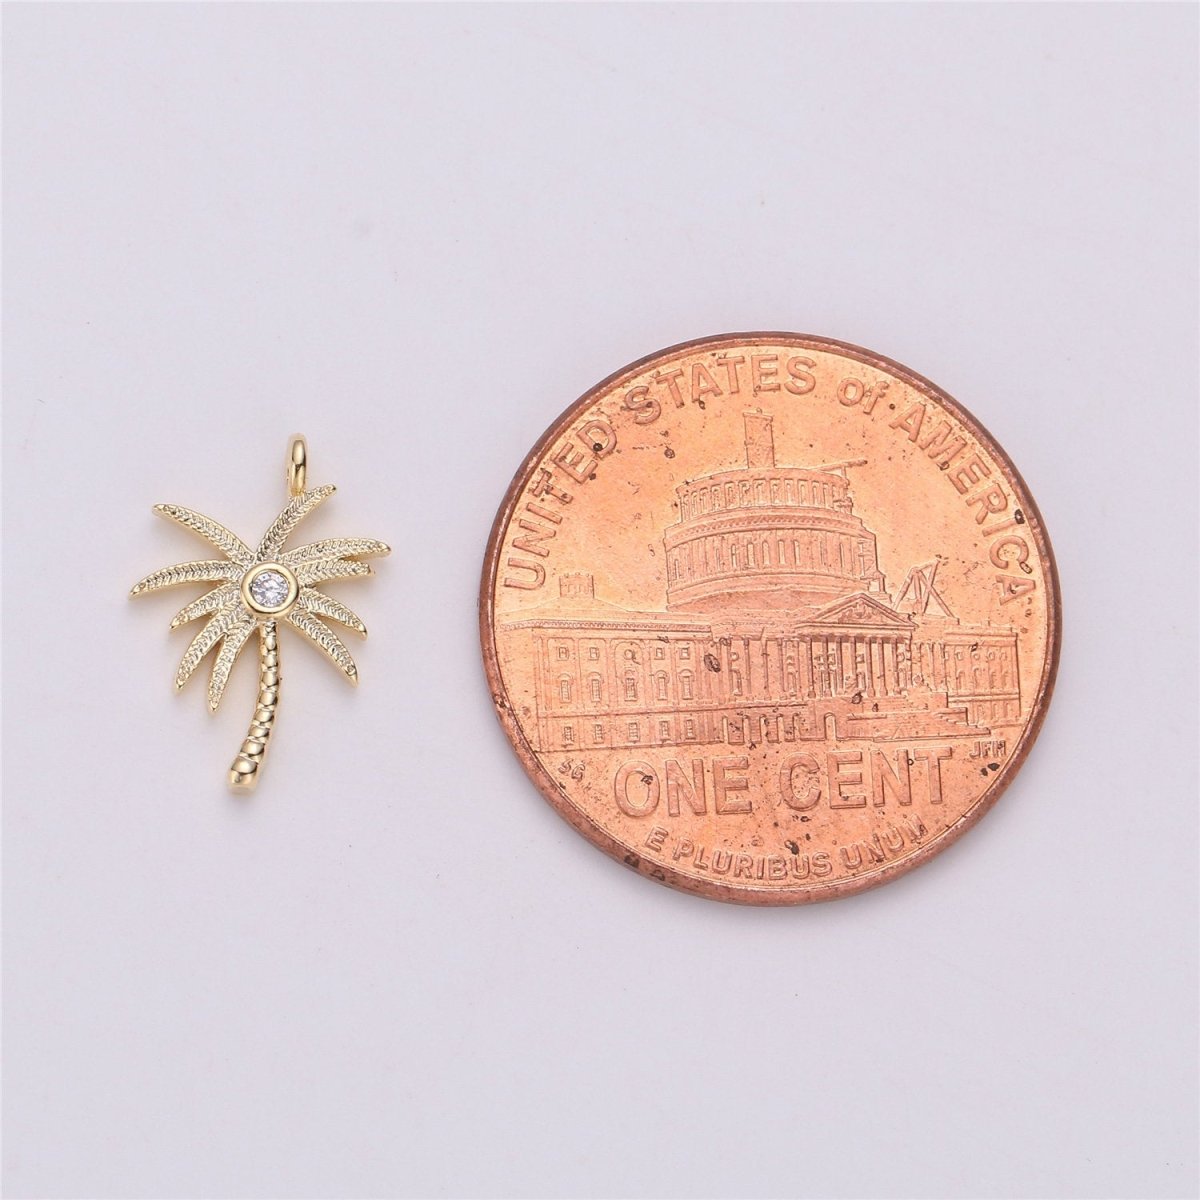 Tiny crystal Palm Tree in gold Filled Dainty palm tree Pendant Necklace Earring Bracelet Charm for Jewelry Making SupplyC-542 - DLUXCA